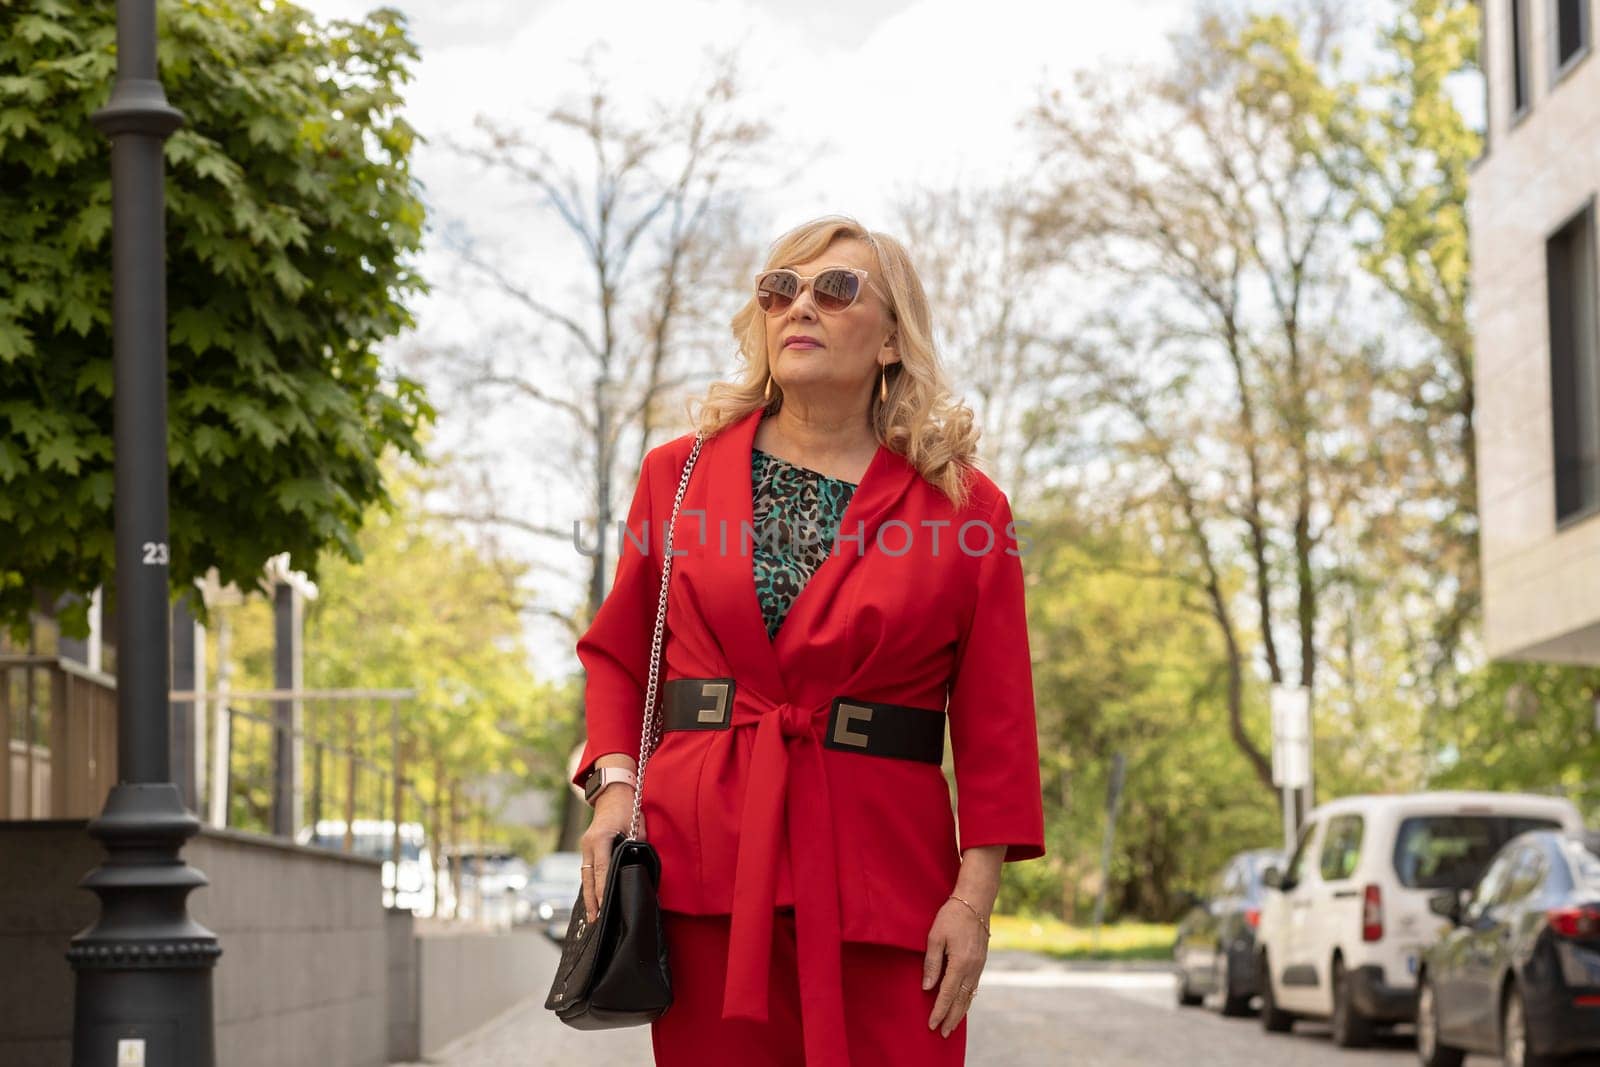 Portrait Attractive Business Lady, Mature Sexagenarian Woman Walking in Street, City, Looking Away. Stylish Senior Female in her 60s Wears Sunglasses. Boss or Manager. Horizontal Plane by netatsi